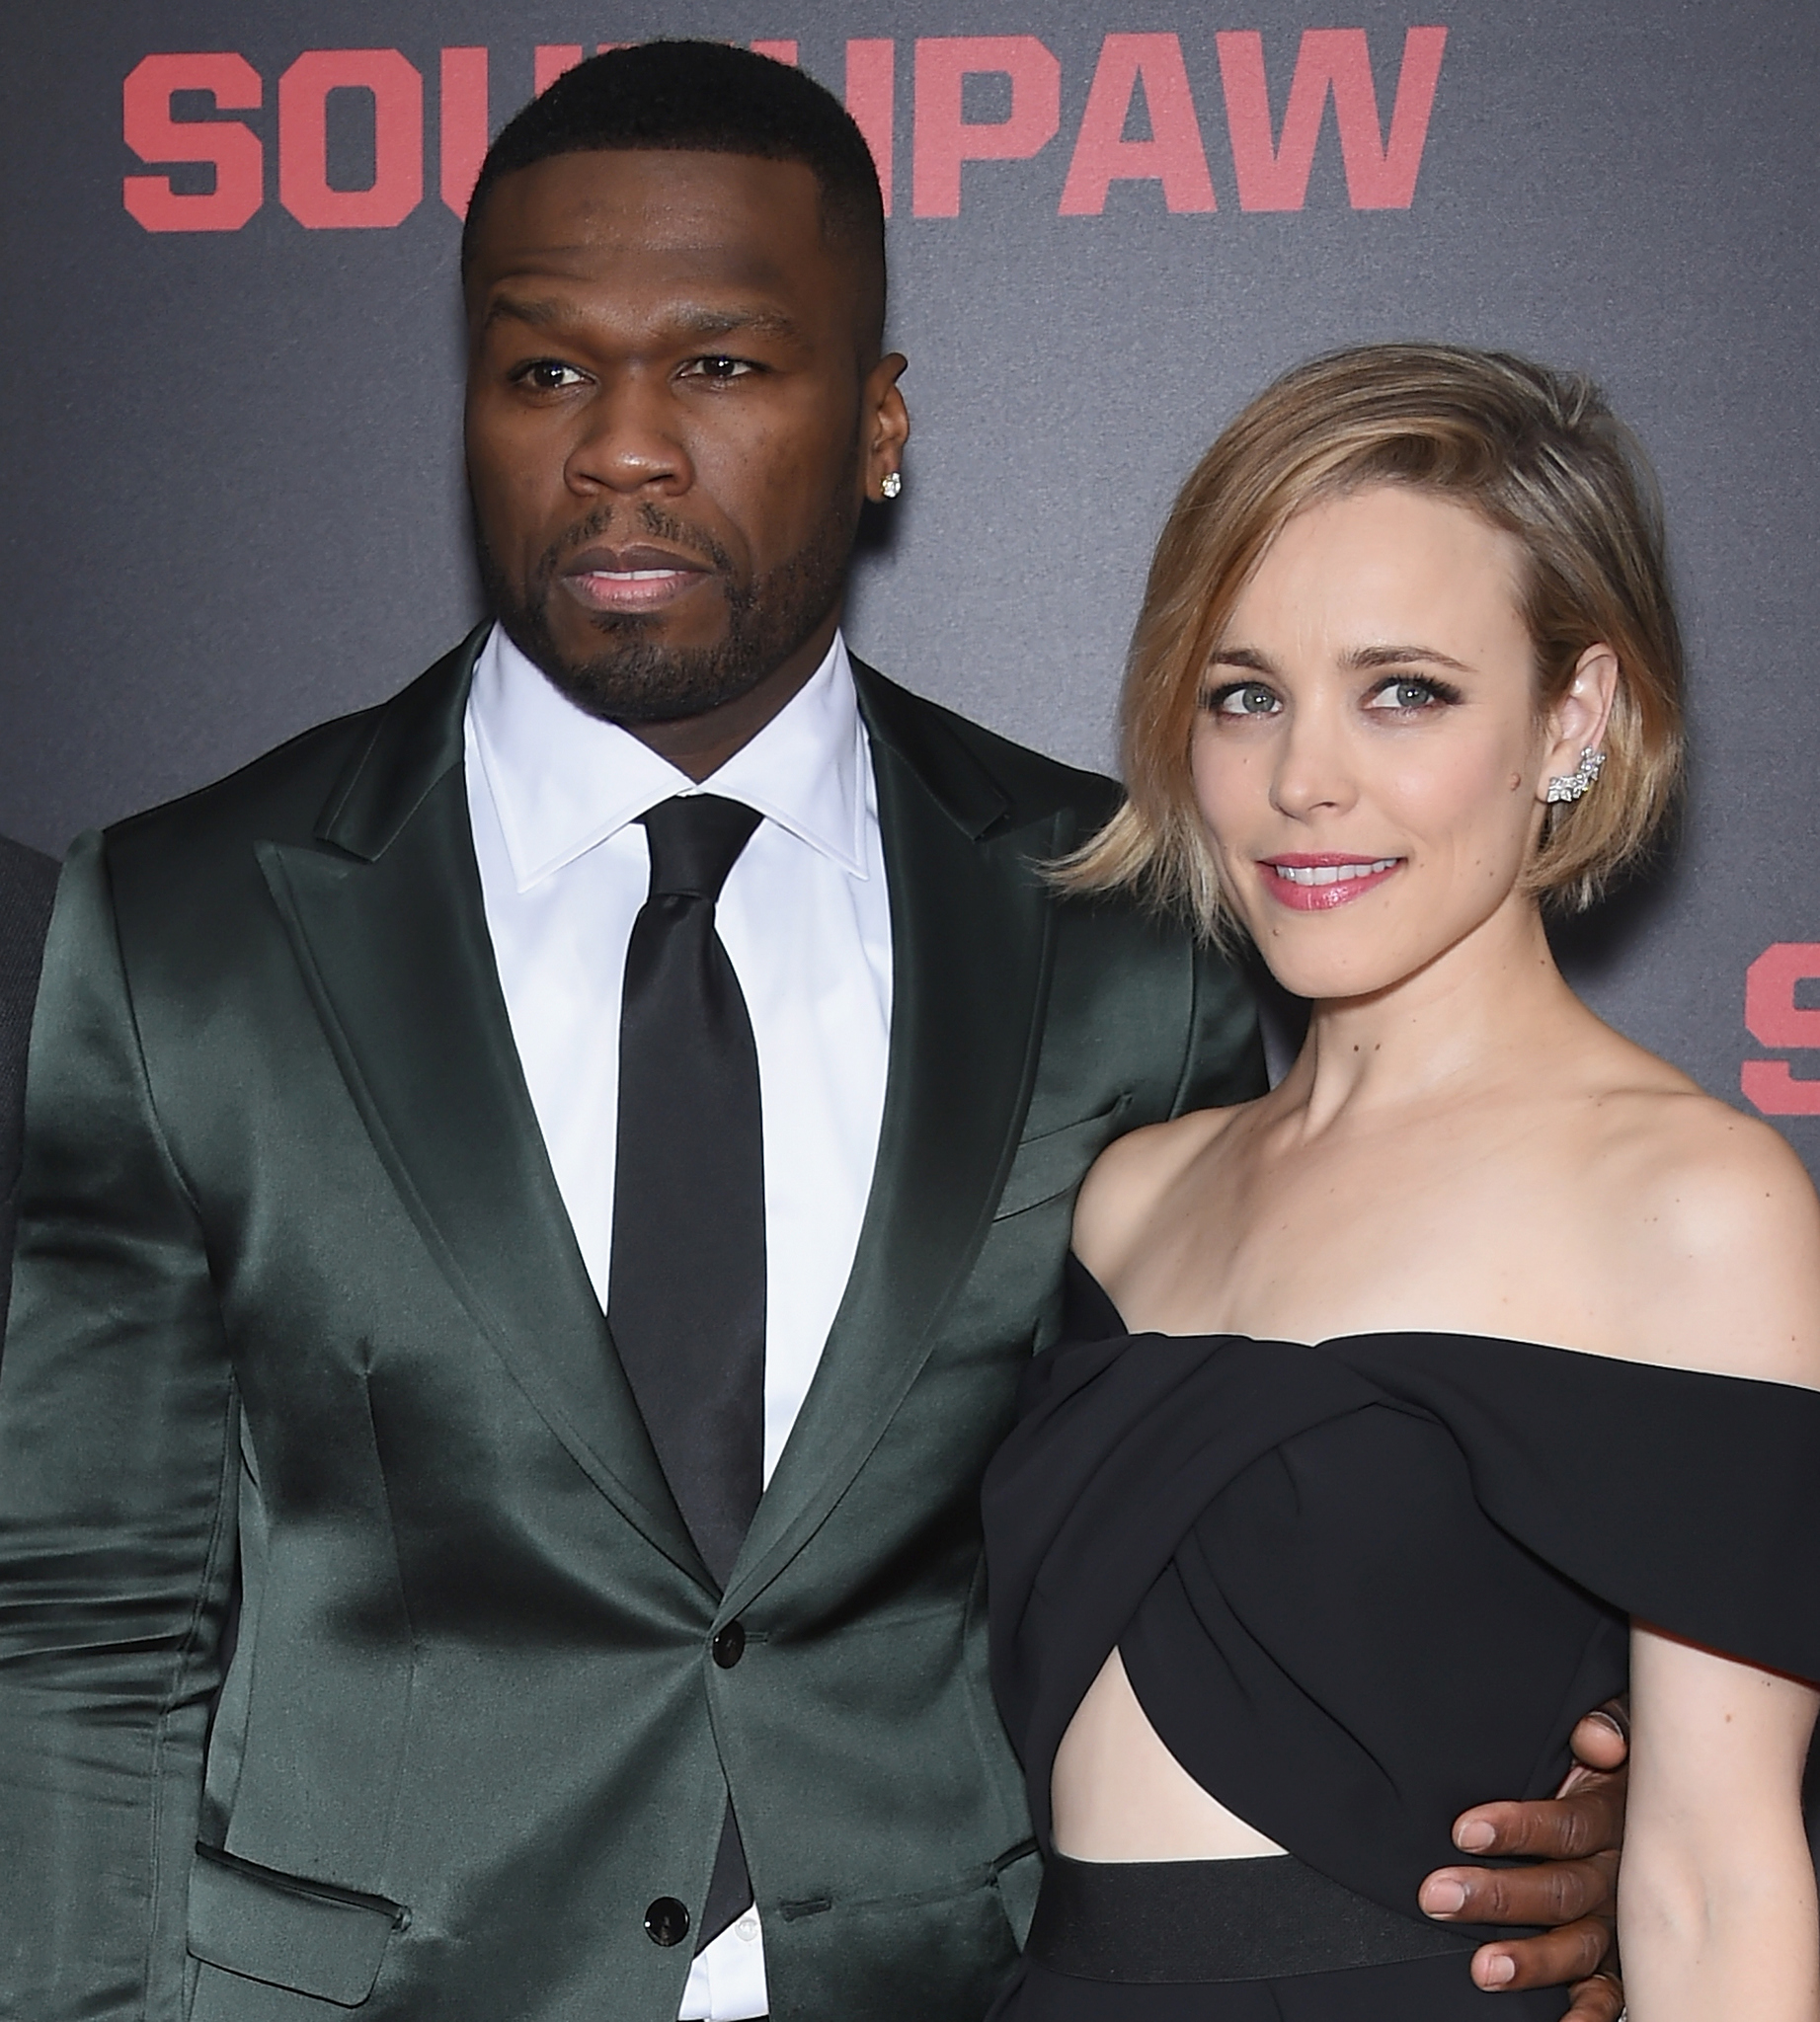 Rachel McAdams and 50 Cent at event of Southpaw (2015)